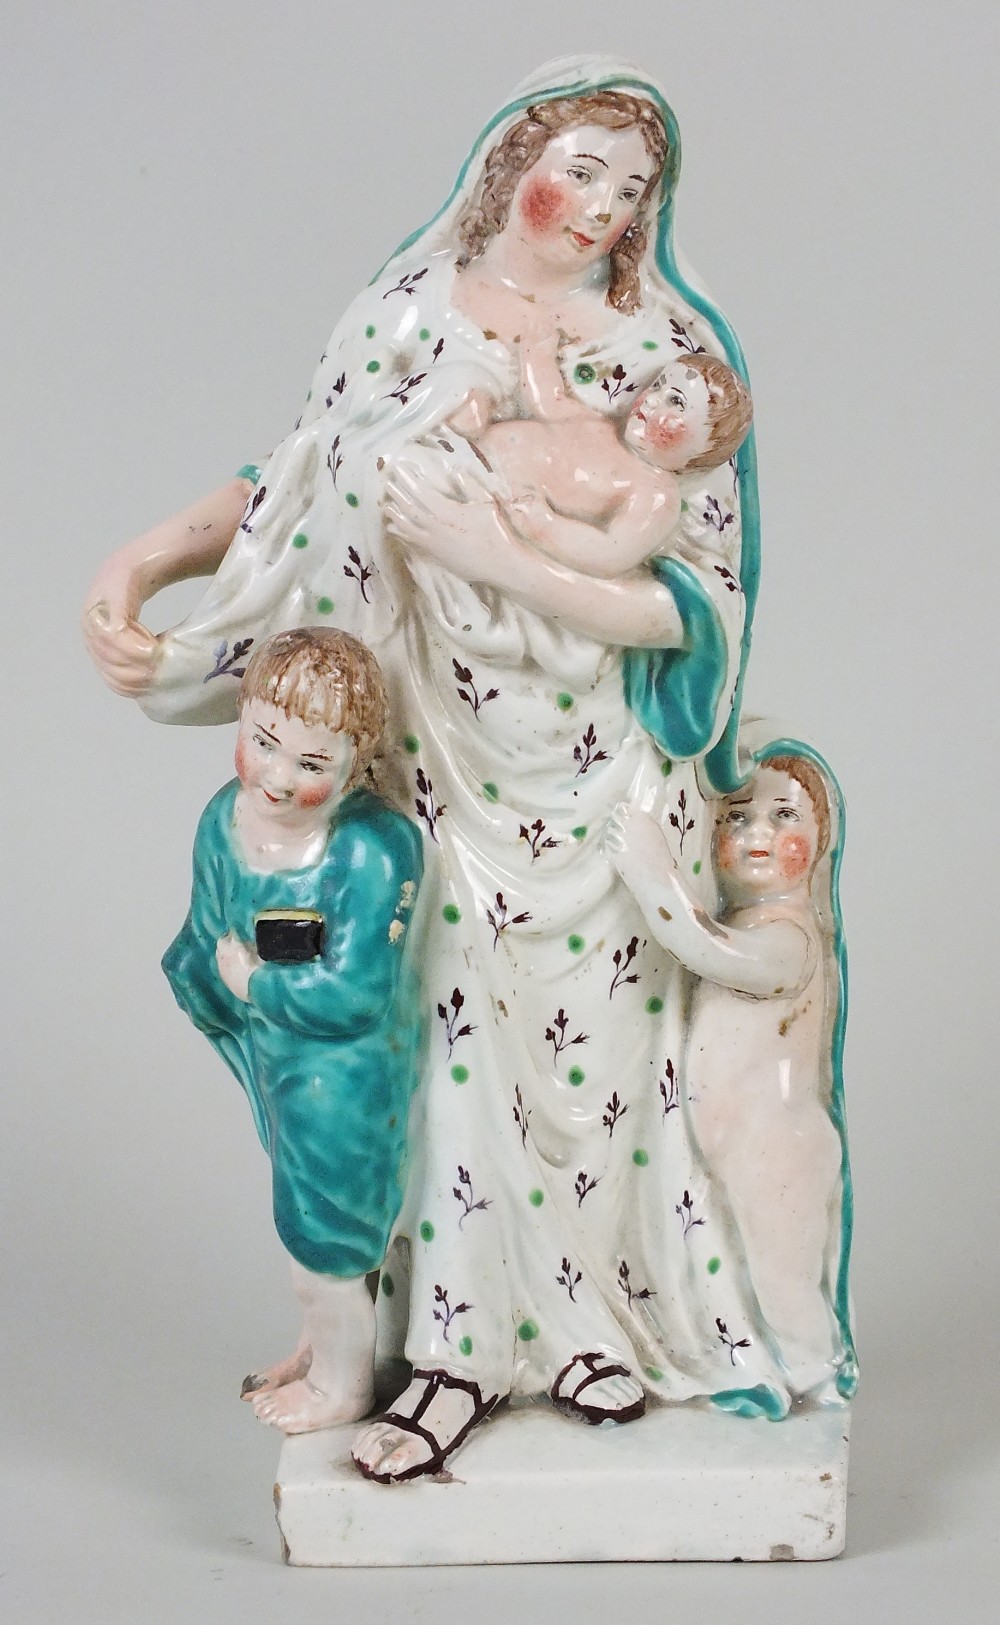 A Staffordshire pearlware model of Charity, early 19th century, her robes and the children beside